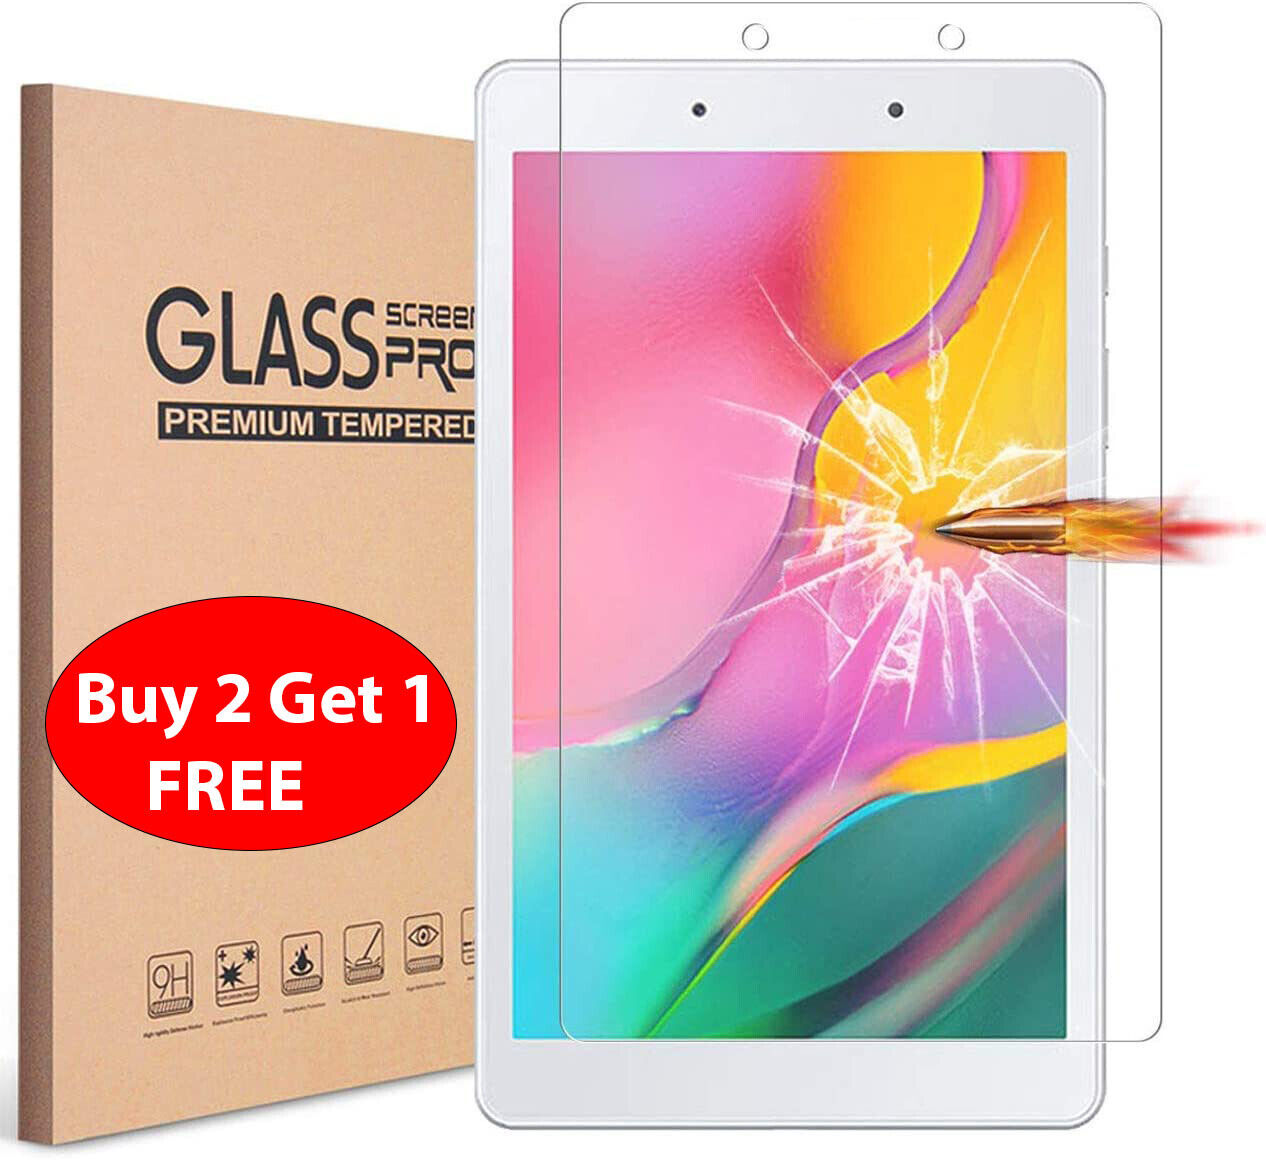 Premium Tempered Glass Screen Protector for Samsung Galaxy Tab A 8.0